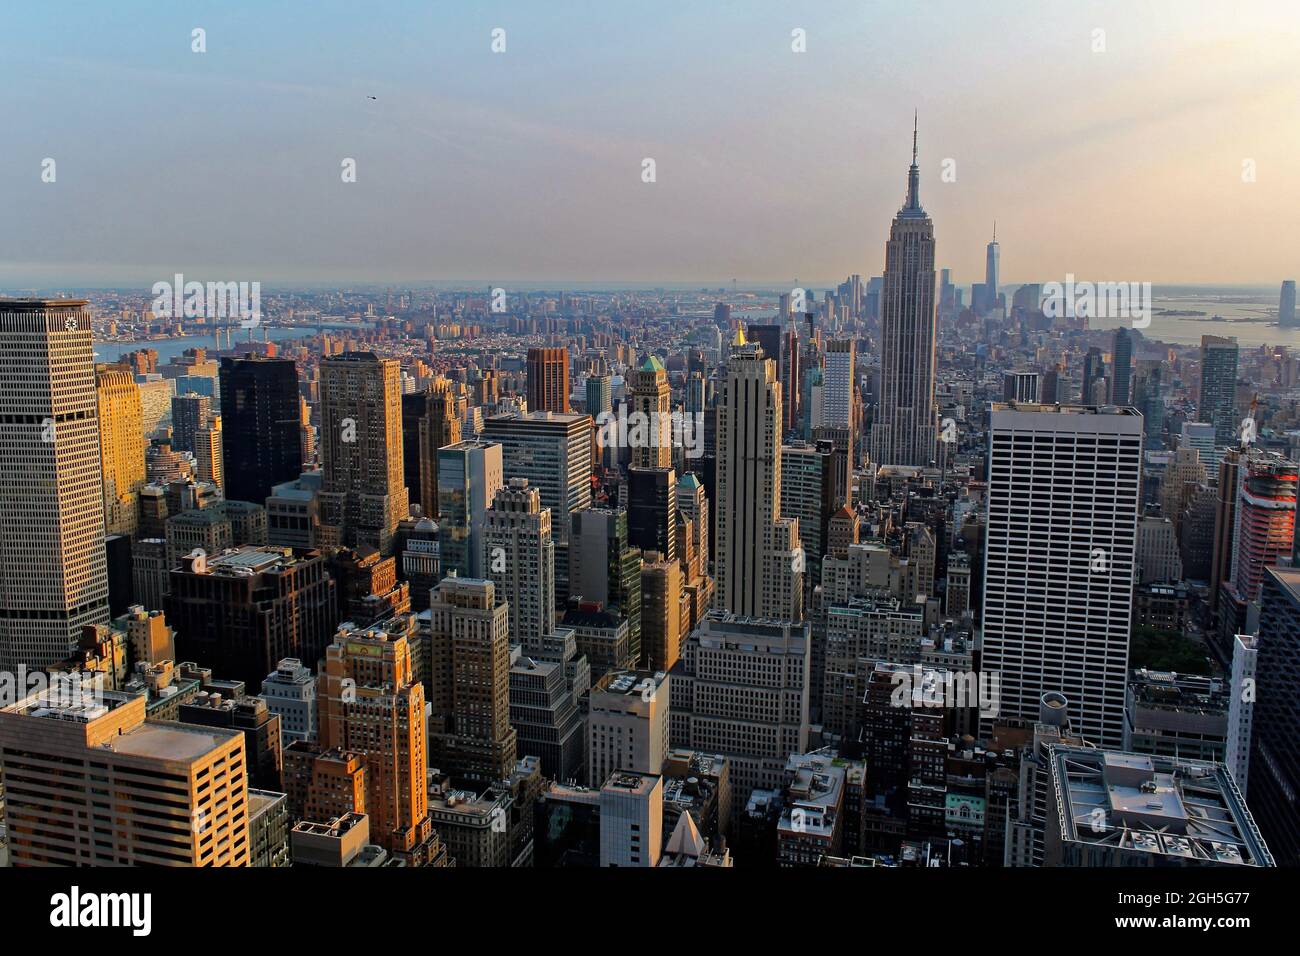 New York City, USA - August 6, 2014: The Empire State Building, One World Trade Center, Times Square, and the skyline of downtown Manhattan at sunset Stock Photo